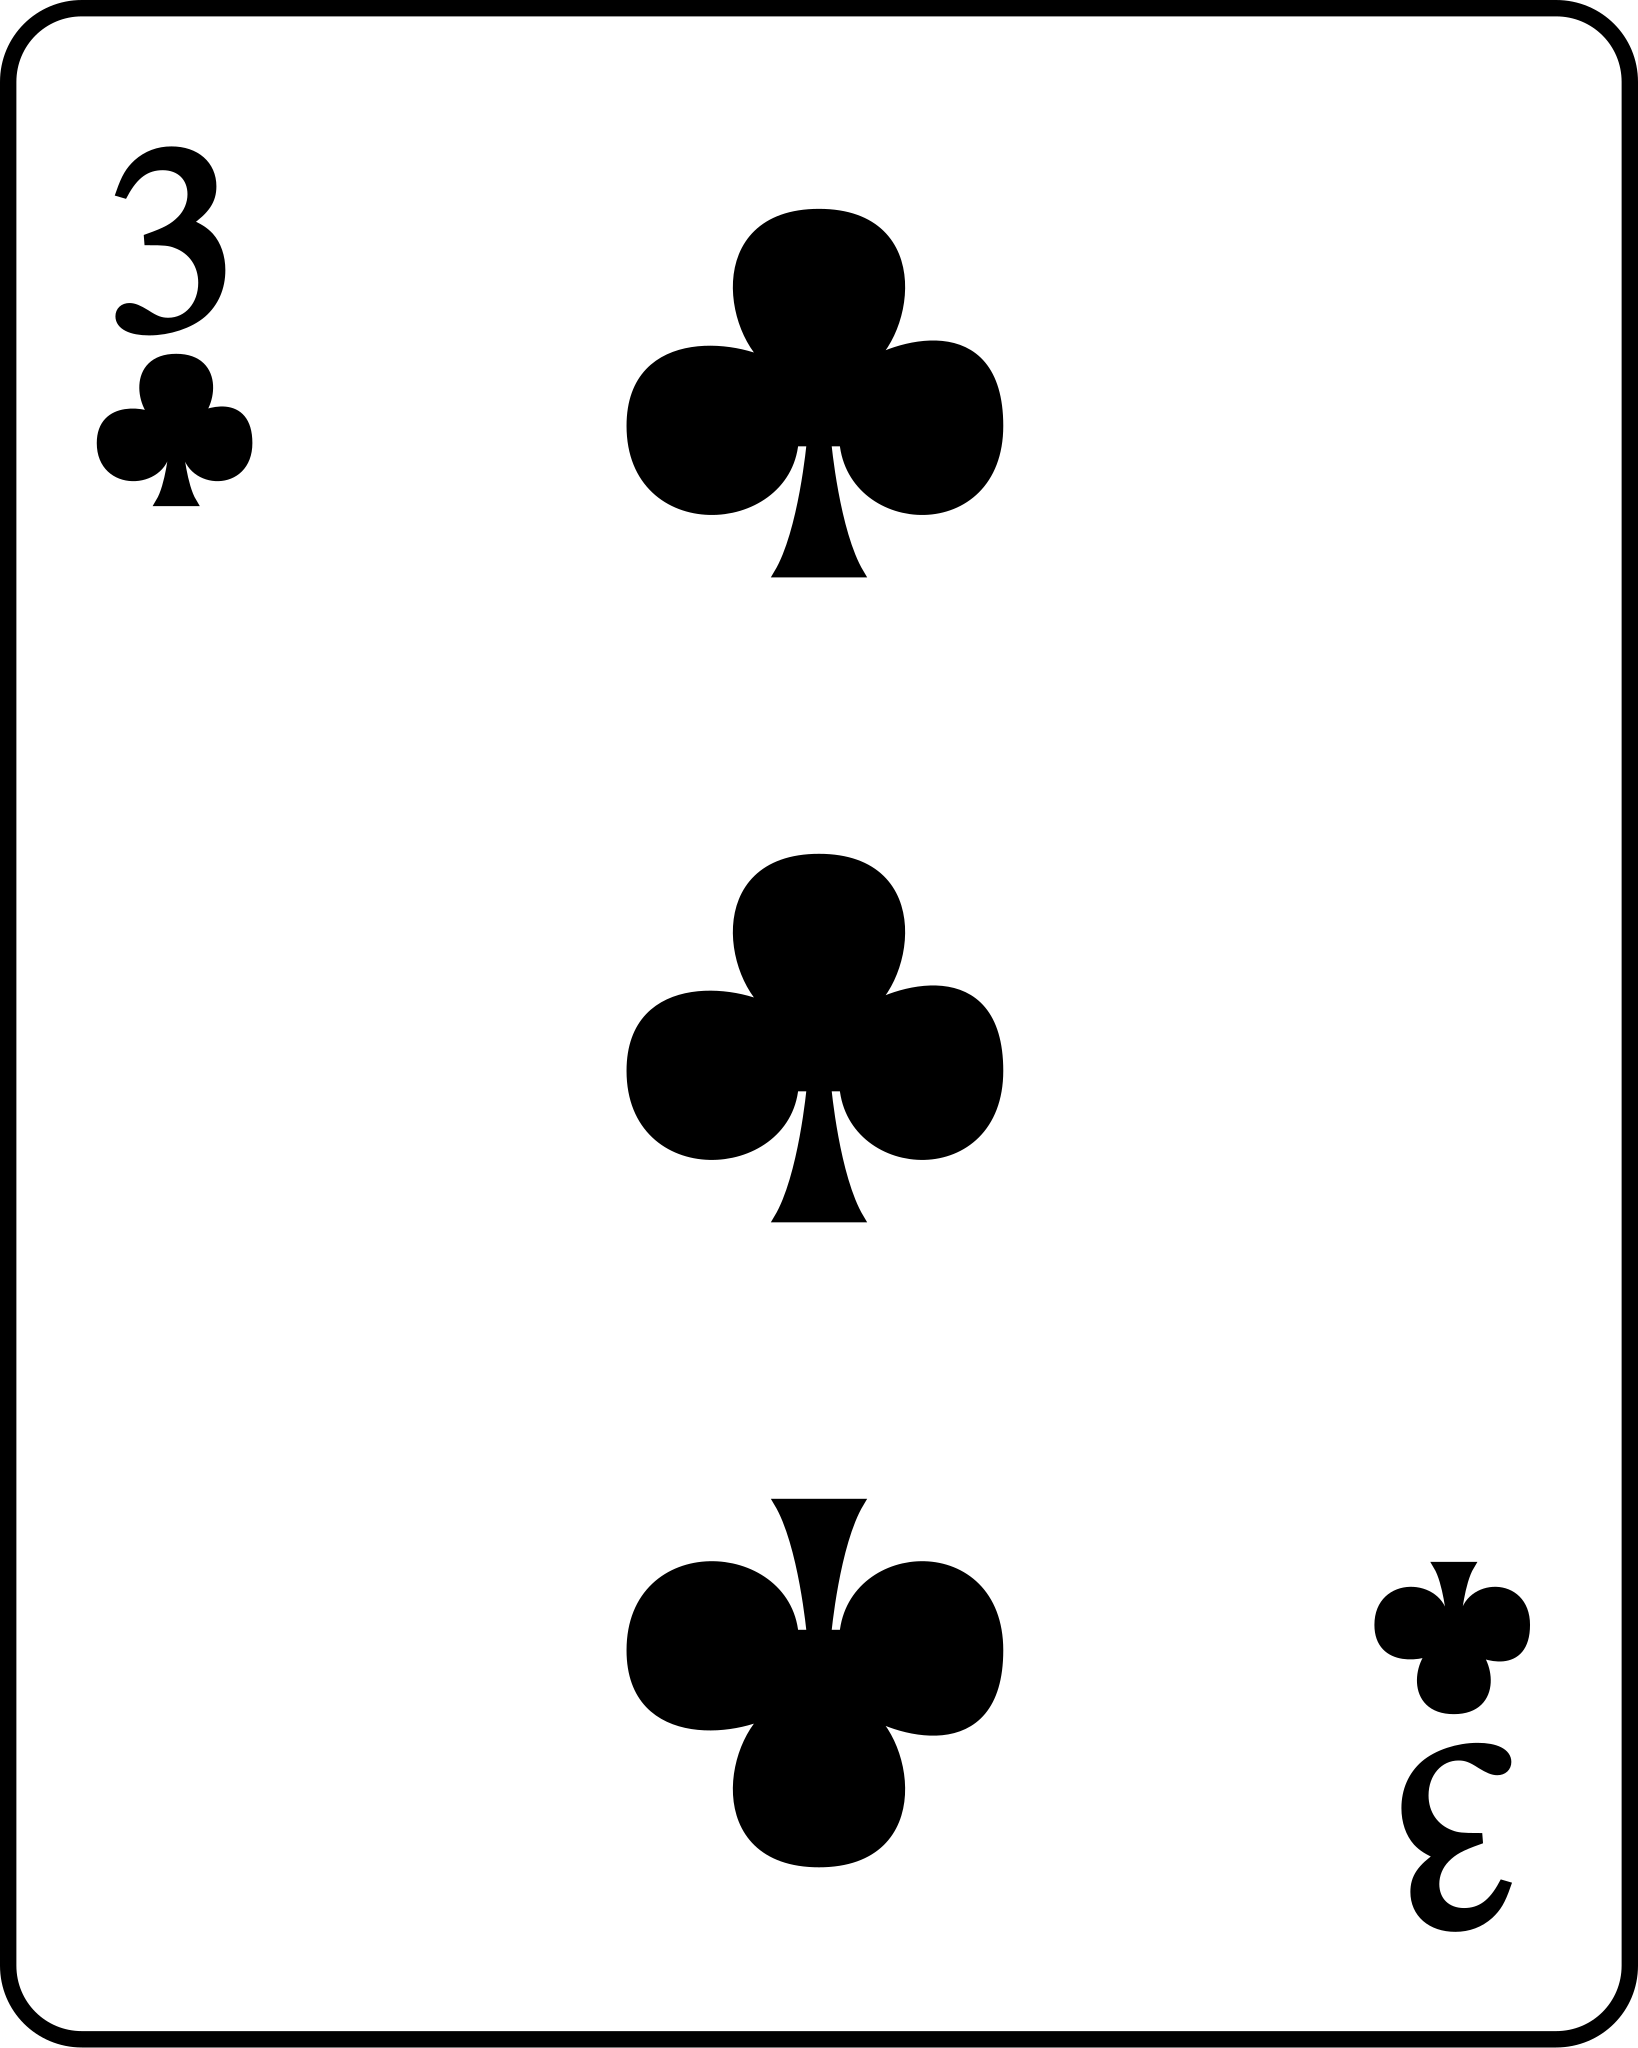 File:Playing card club  - Wikimedia Commons